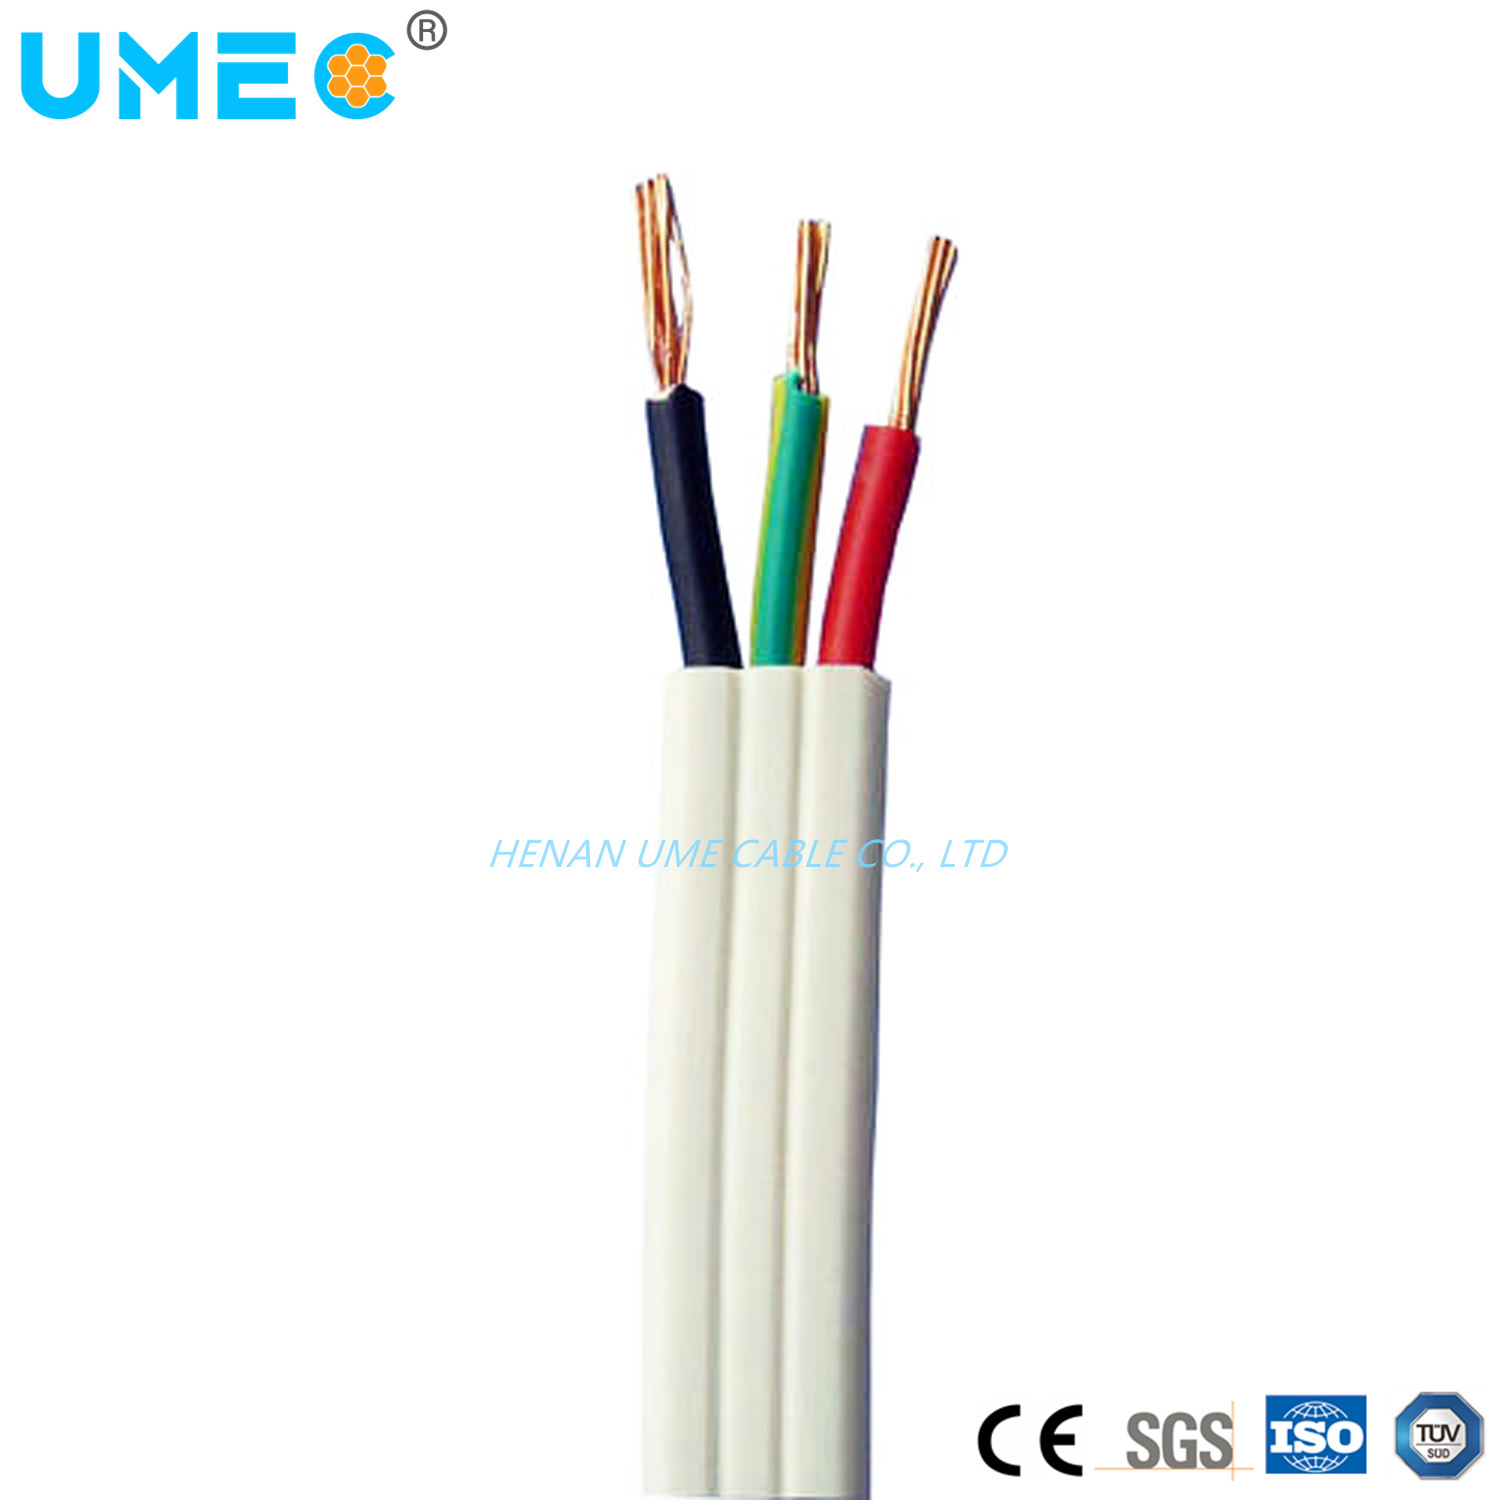 Wholesale Bulk Price PVC Insulated and Sheathed Flat Wire Flat Electric Wire TPS E Lectrical Cable